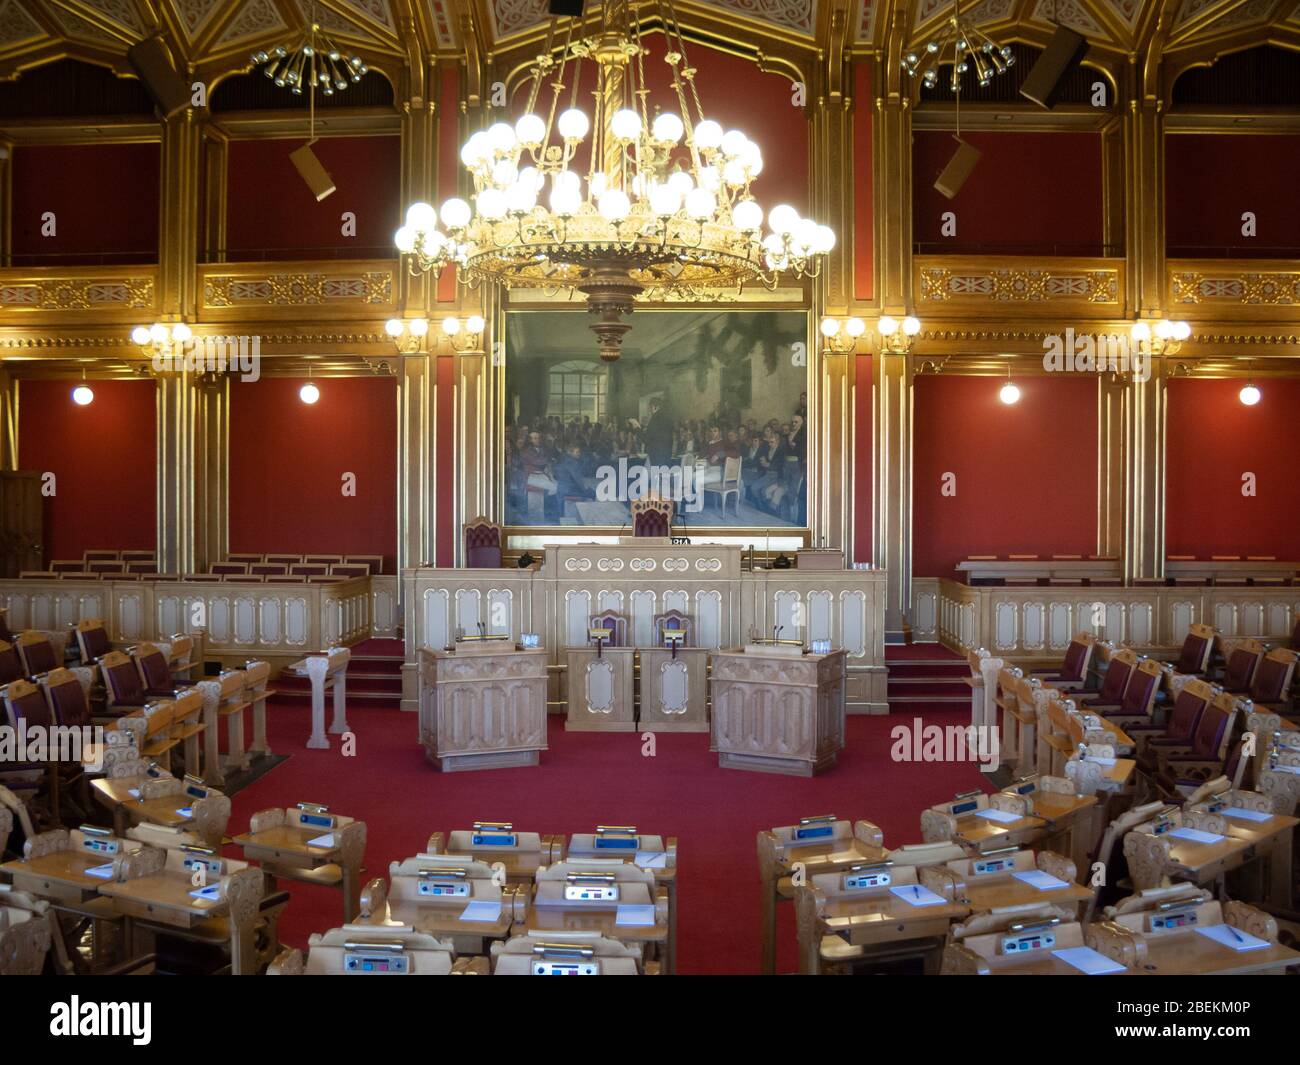 Oslo, Norway November 24, 2009: Interior of the Congress Stortinget with the seats of the representatives. Stock Photo